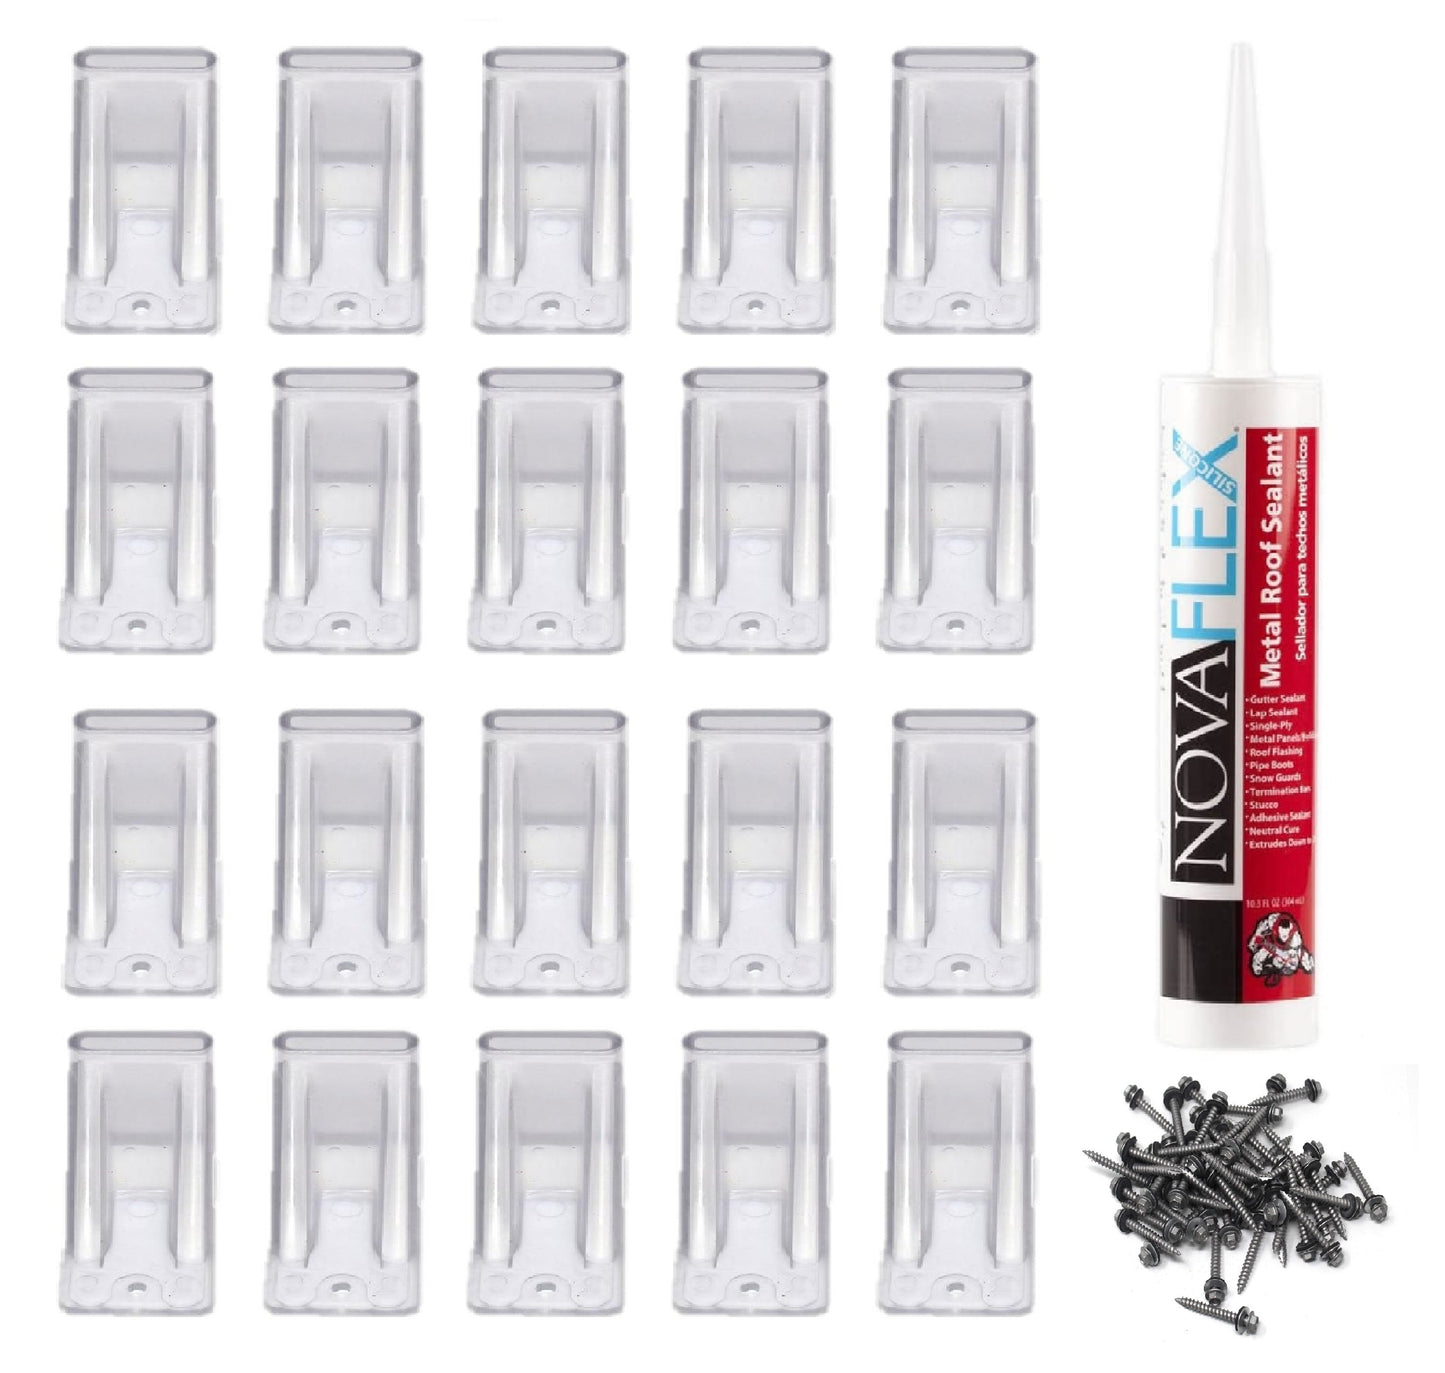 Clear Plastic Mini 25 Piece Snow & Ice Roof Guard Kits with Mounting Hardware | Prevent Sliding Snow Stop Buildup